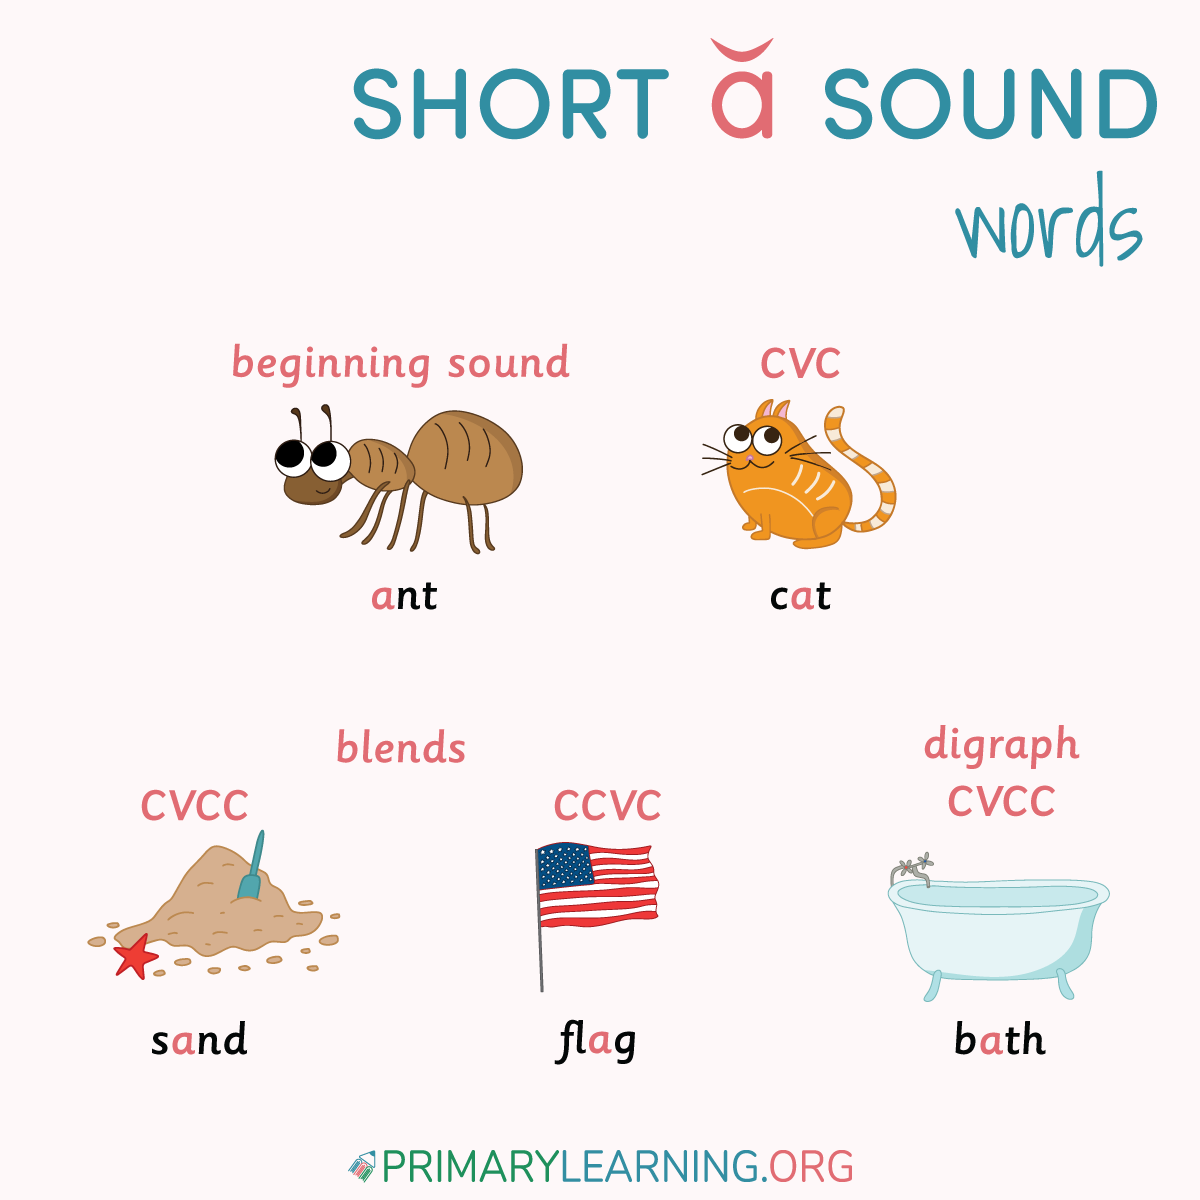 https://primarylearning.org/wp-content/uploads/2023/09/CL-Short-A-Sound-Words.png